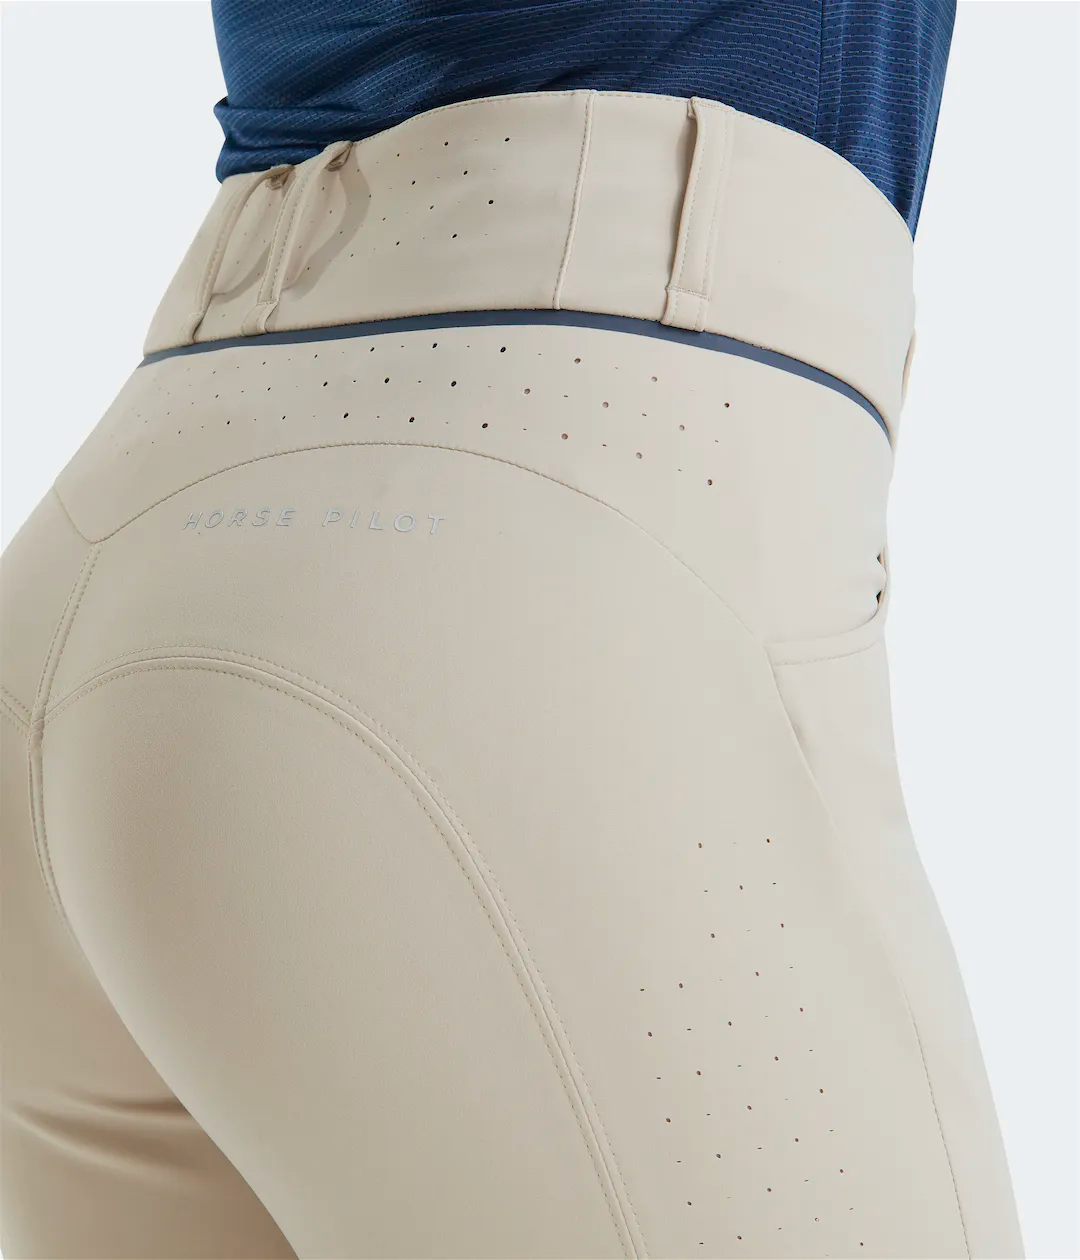 Riding Pants for Women